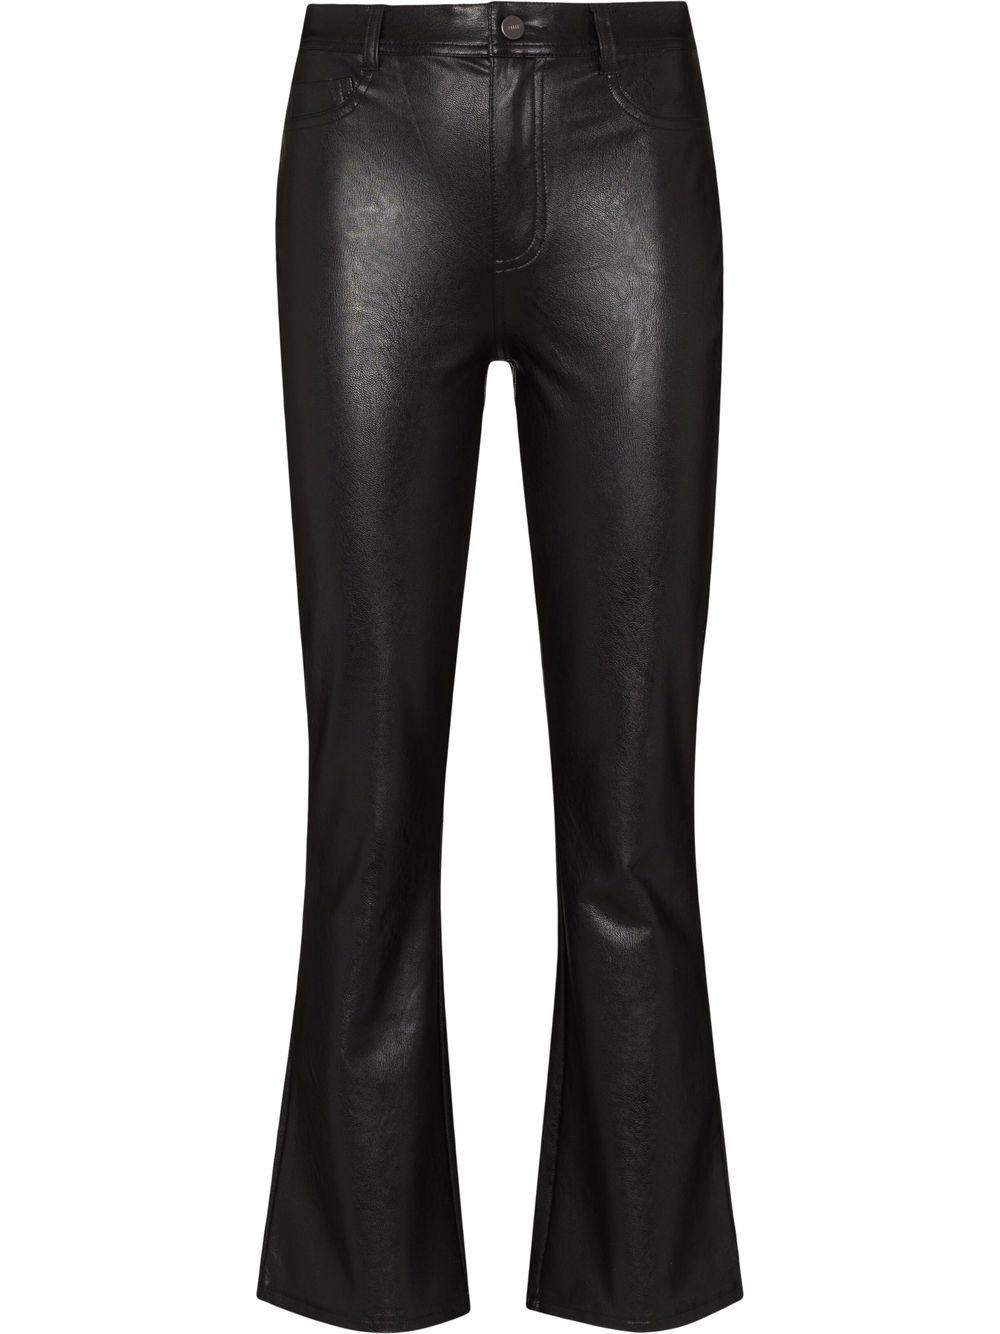 PAIGE Claudine Flared Trousers - Farfetch